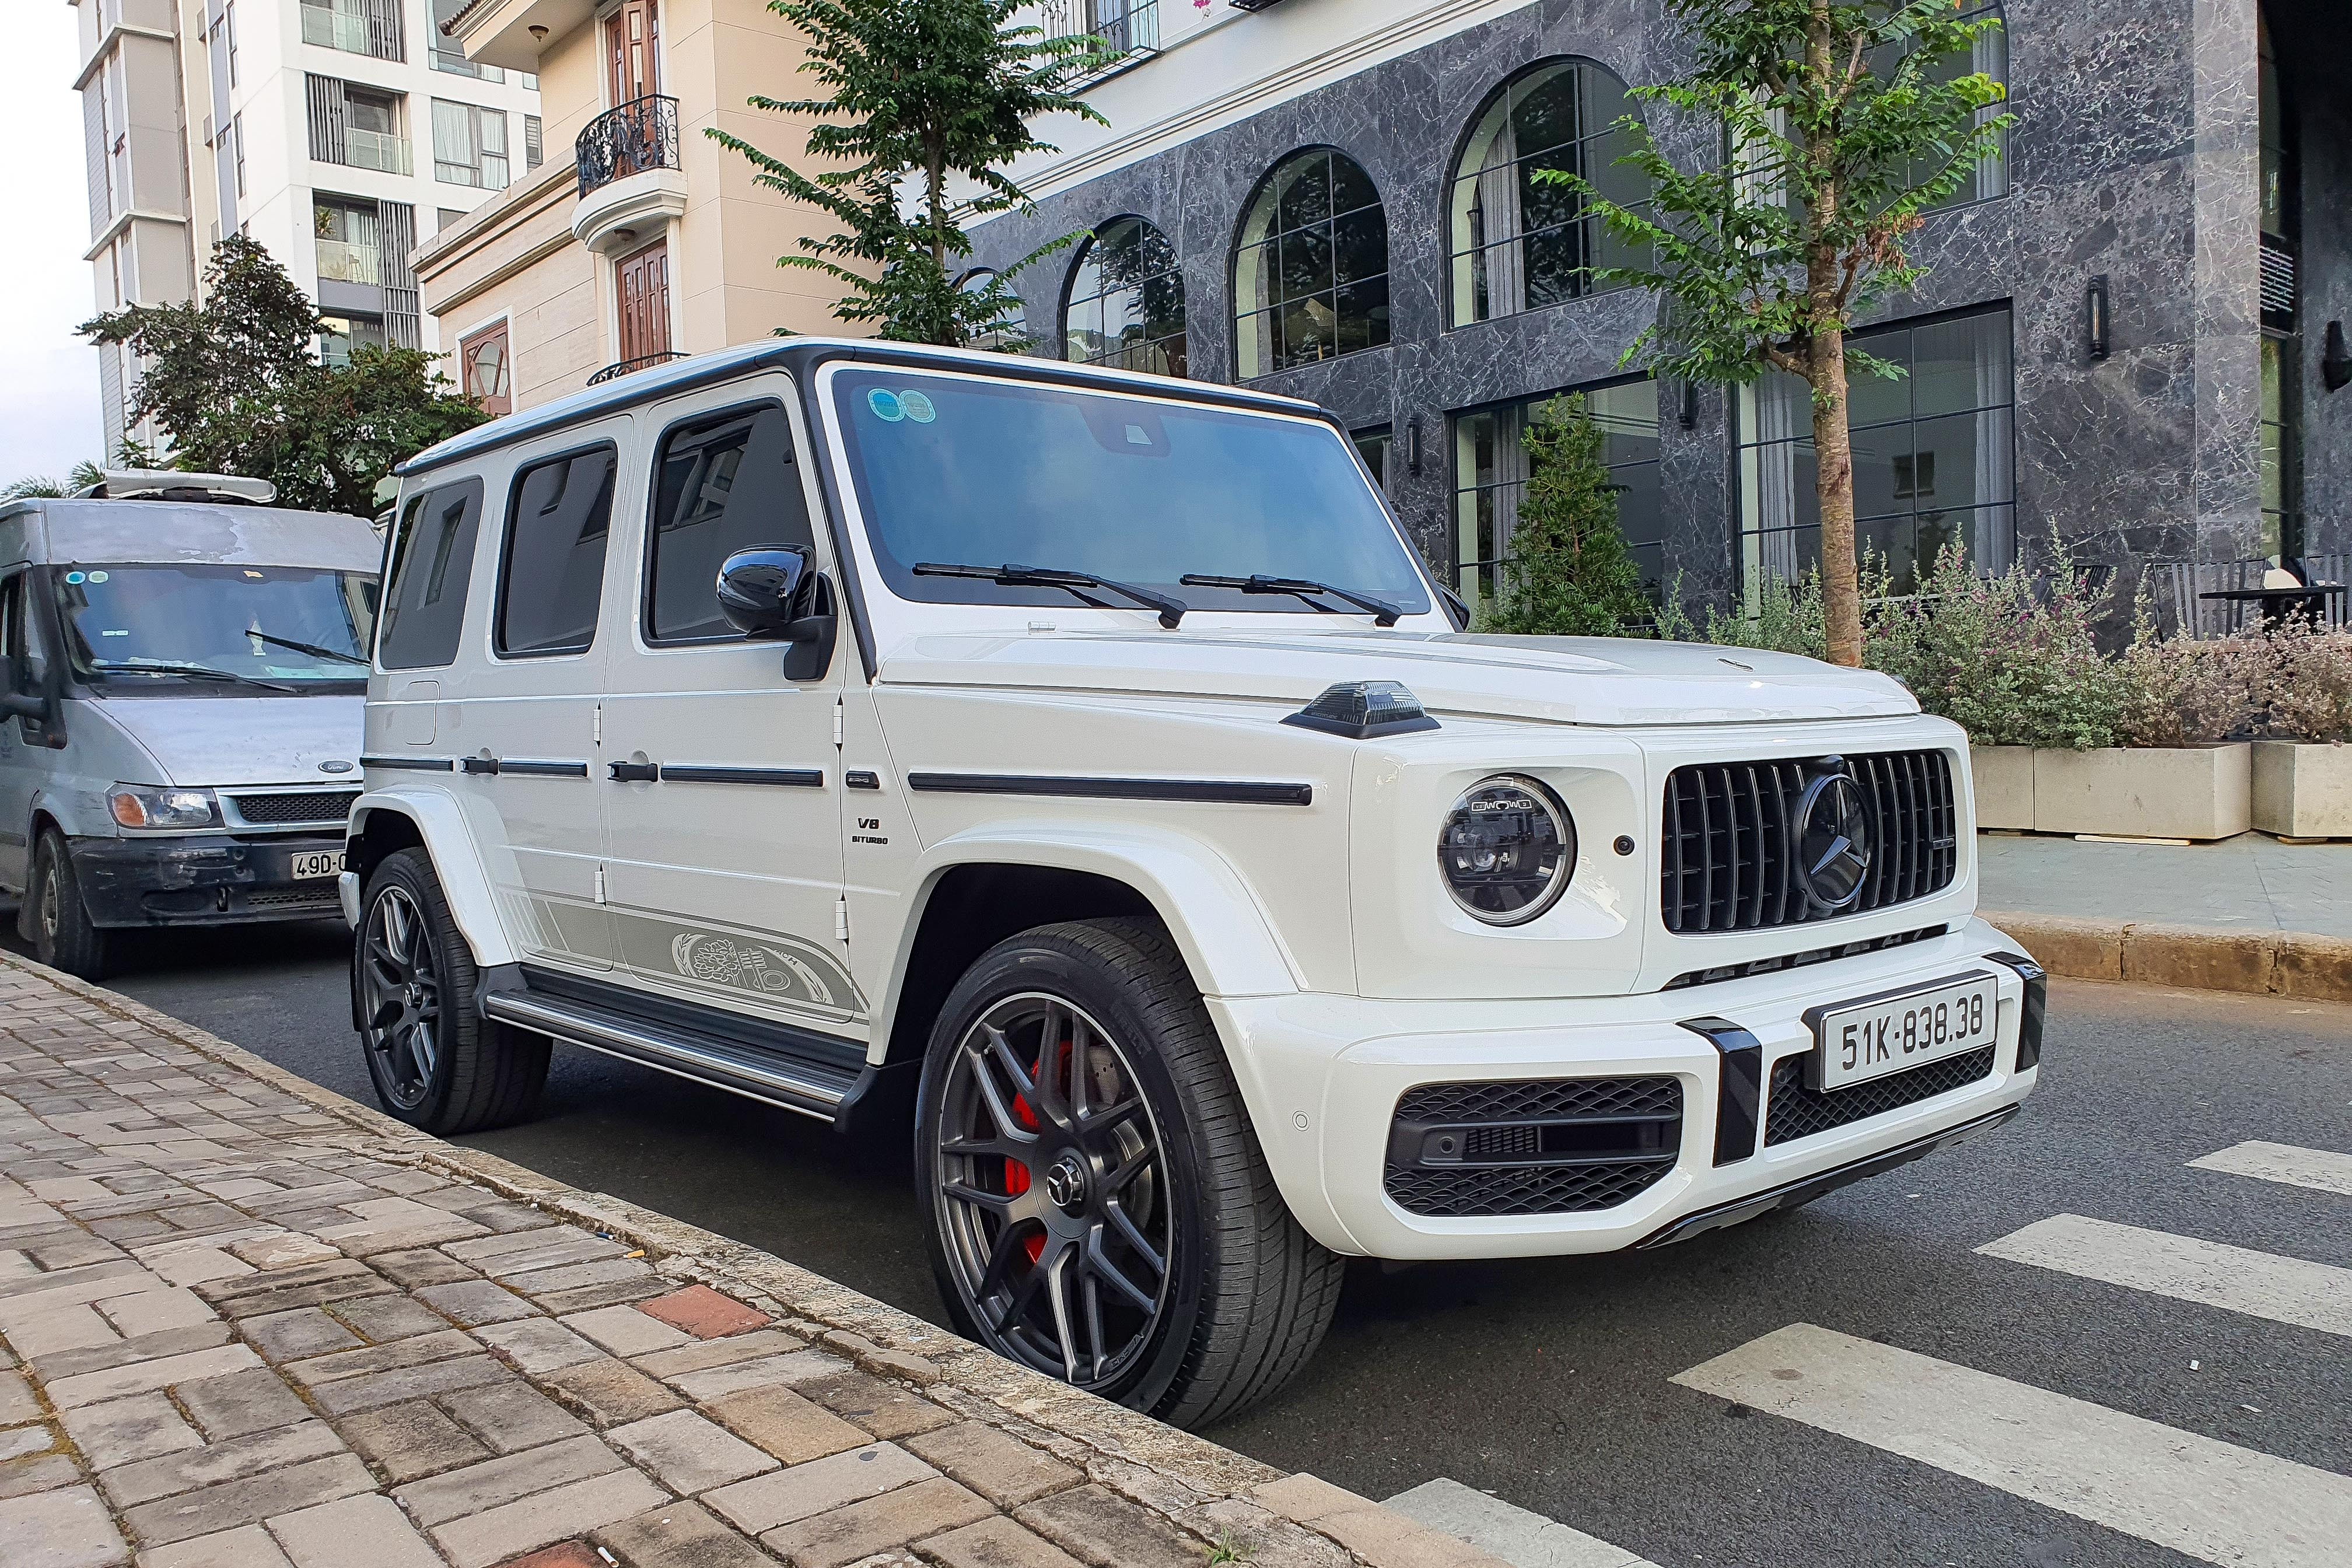 mercedes,  benz,  mercedes-benz,  amg,  mercedes-amg,  g63,  g 63,  edition 55,  g63 edition 55,  suv,  hieu suat cao,  g 63 edition 55 anh 1